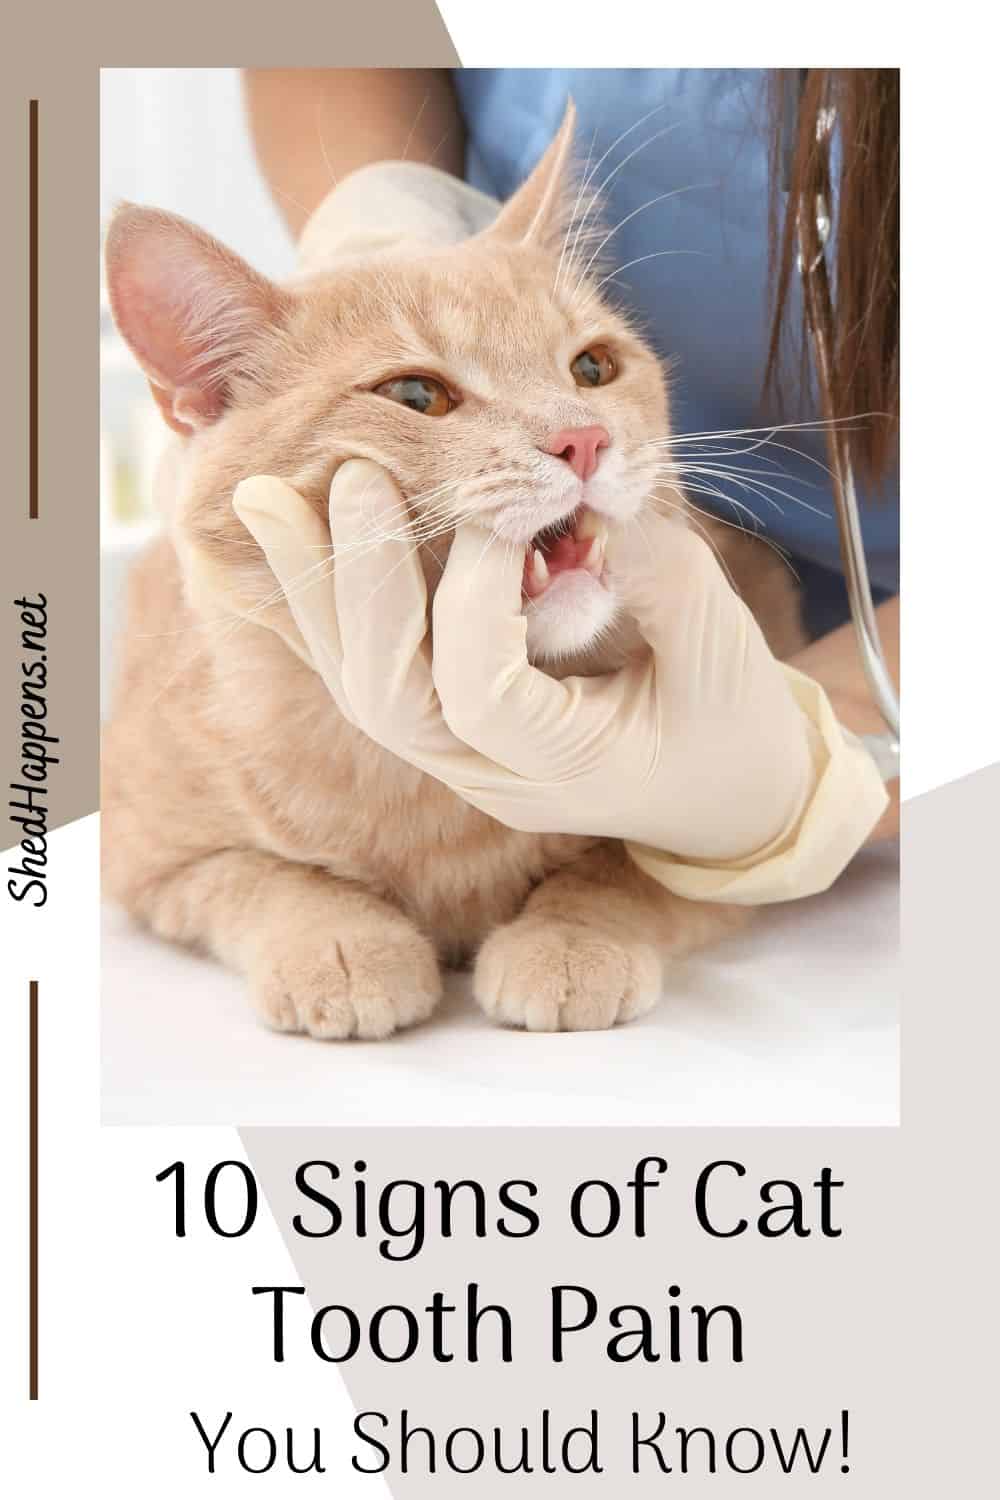 An orange tabby cat is laying on an examination table, a veterinarian wearing blue scrubs is leaning over it, holding its mouth open with a gloved hand. Text states 10 signs of cat tooth pain you should know!